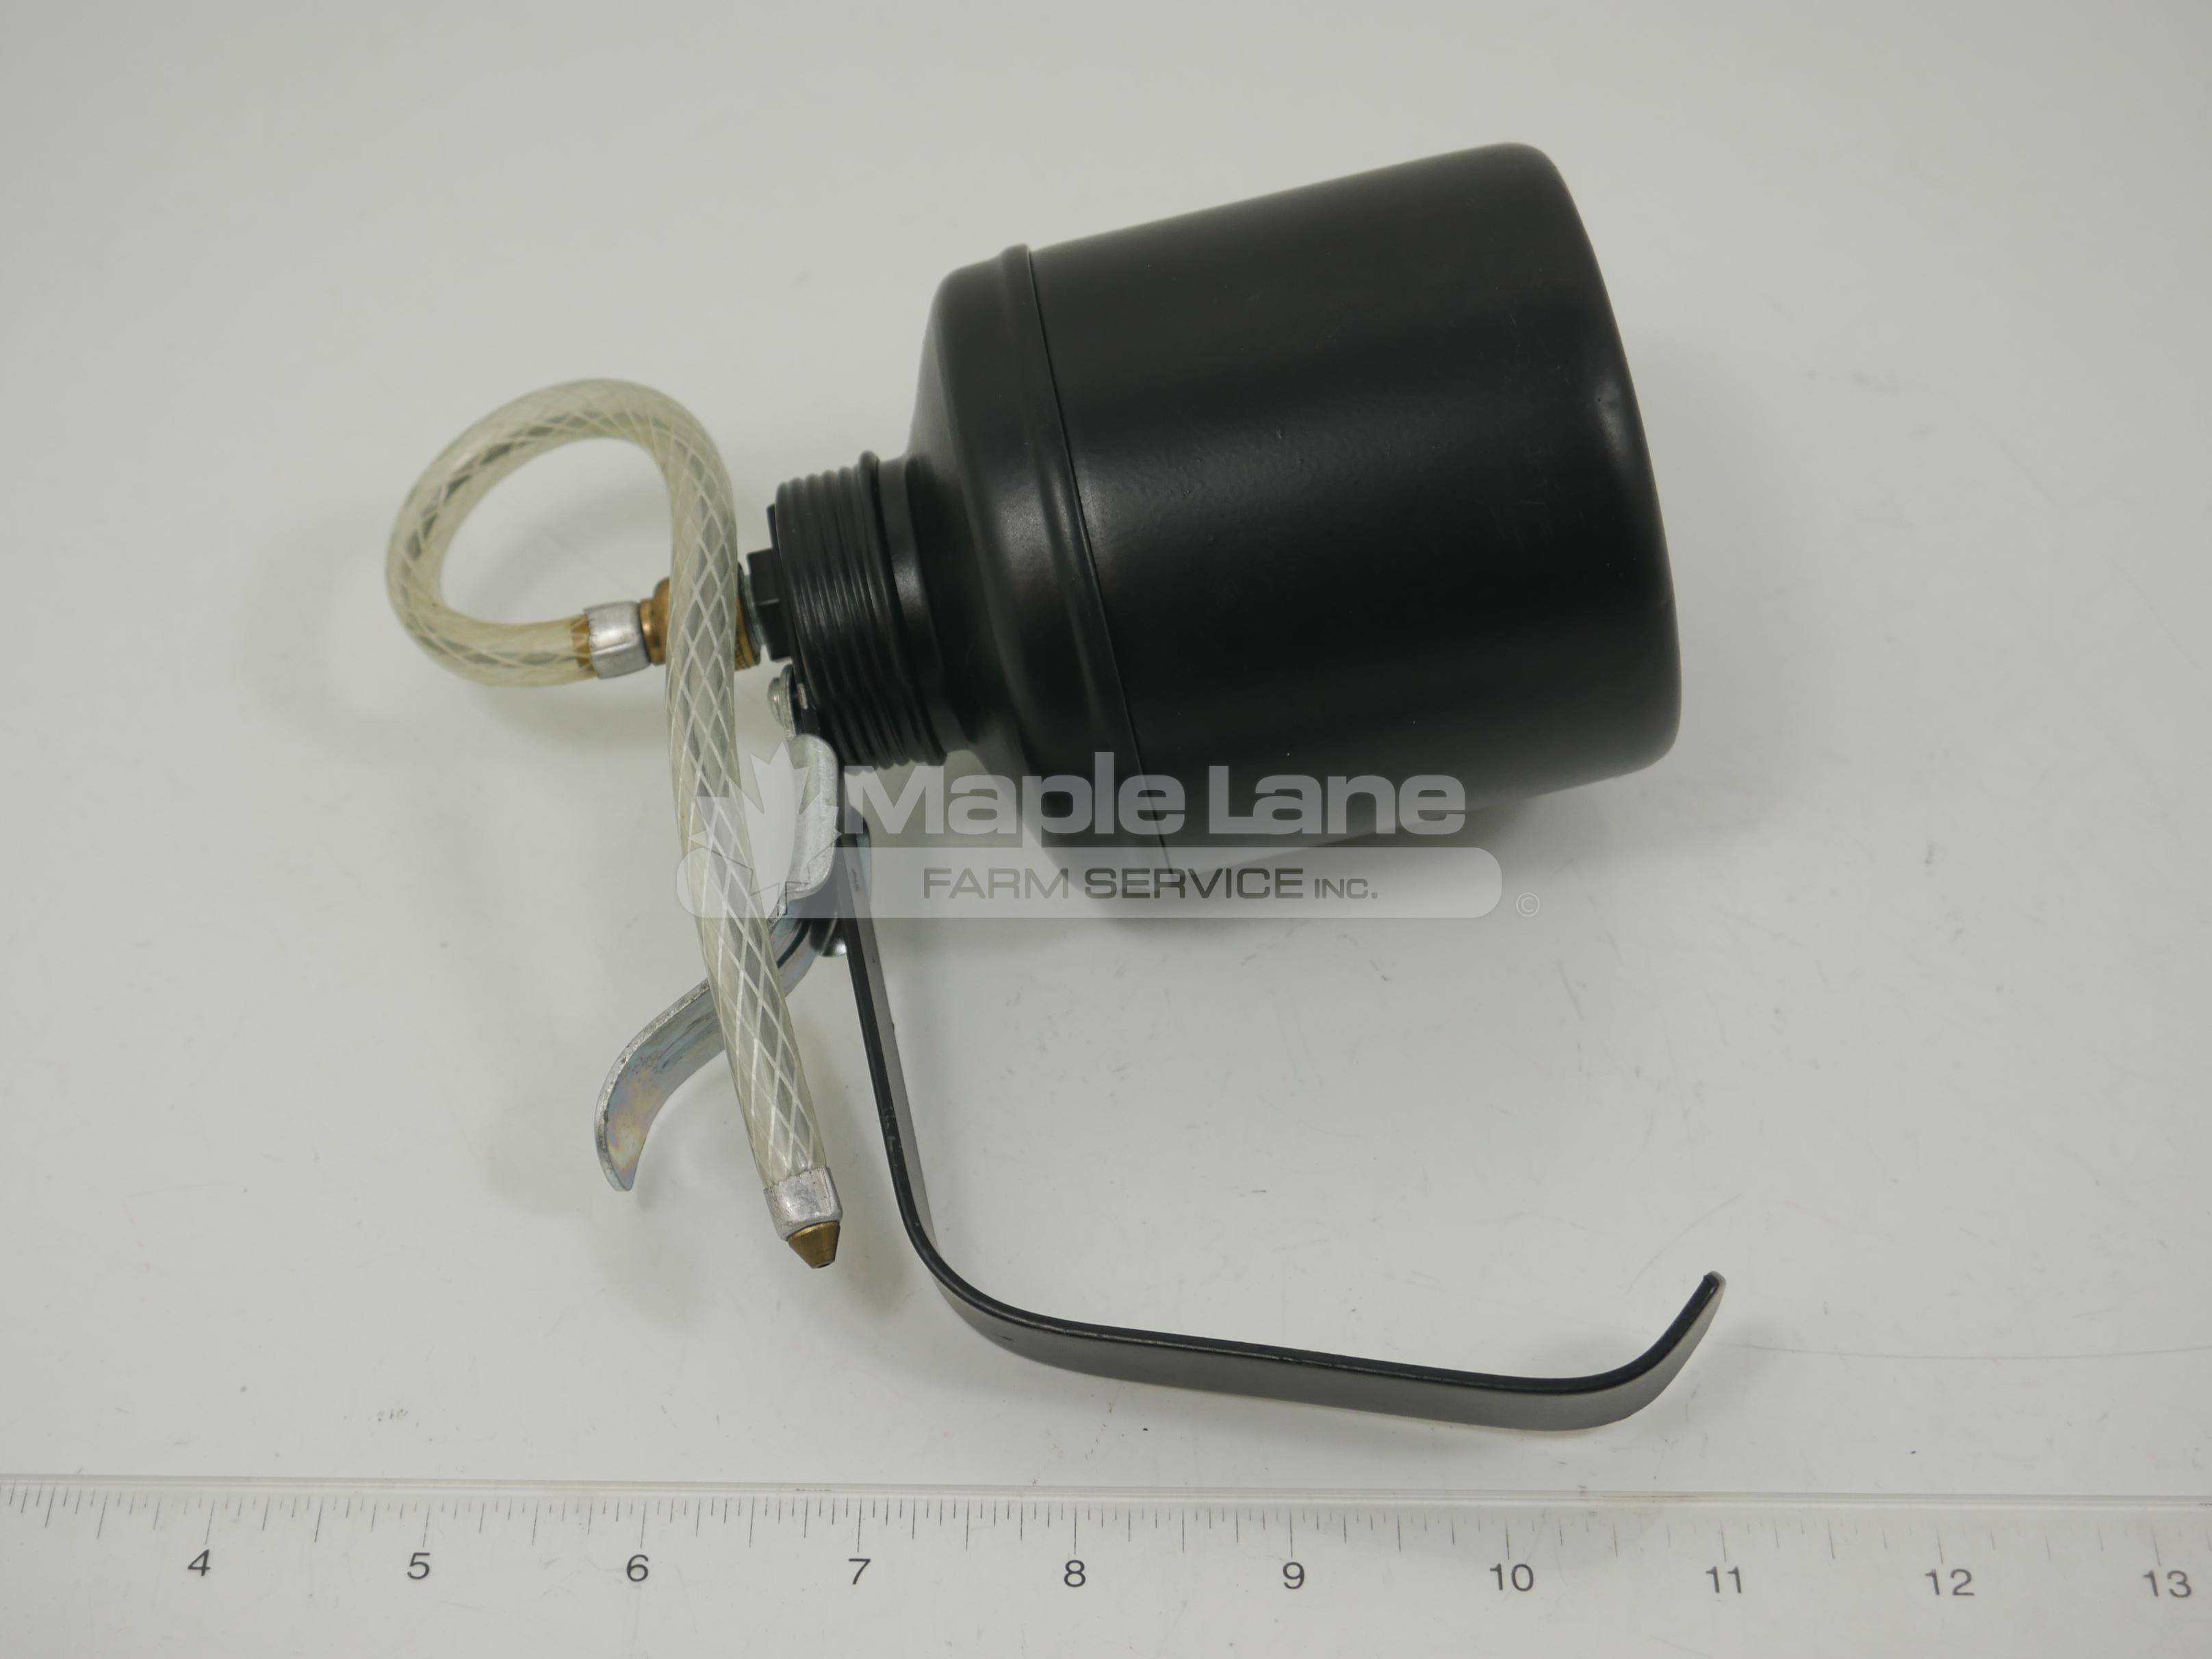 1 Pint Squeeze Handle Oil Can